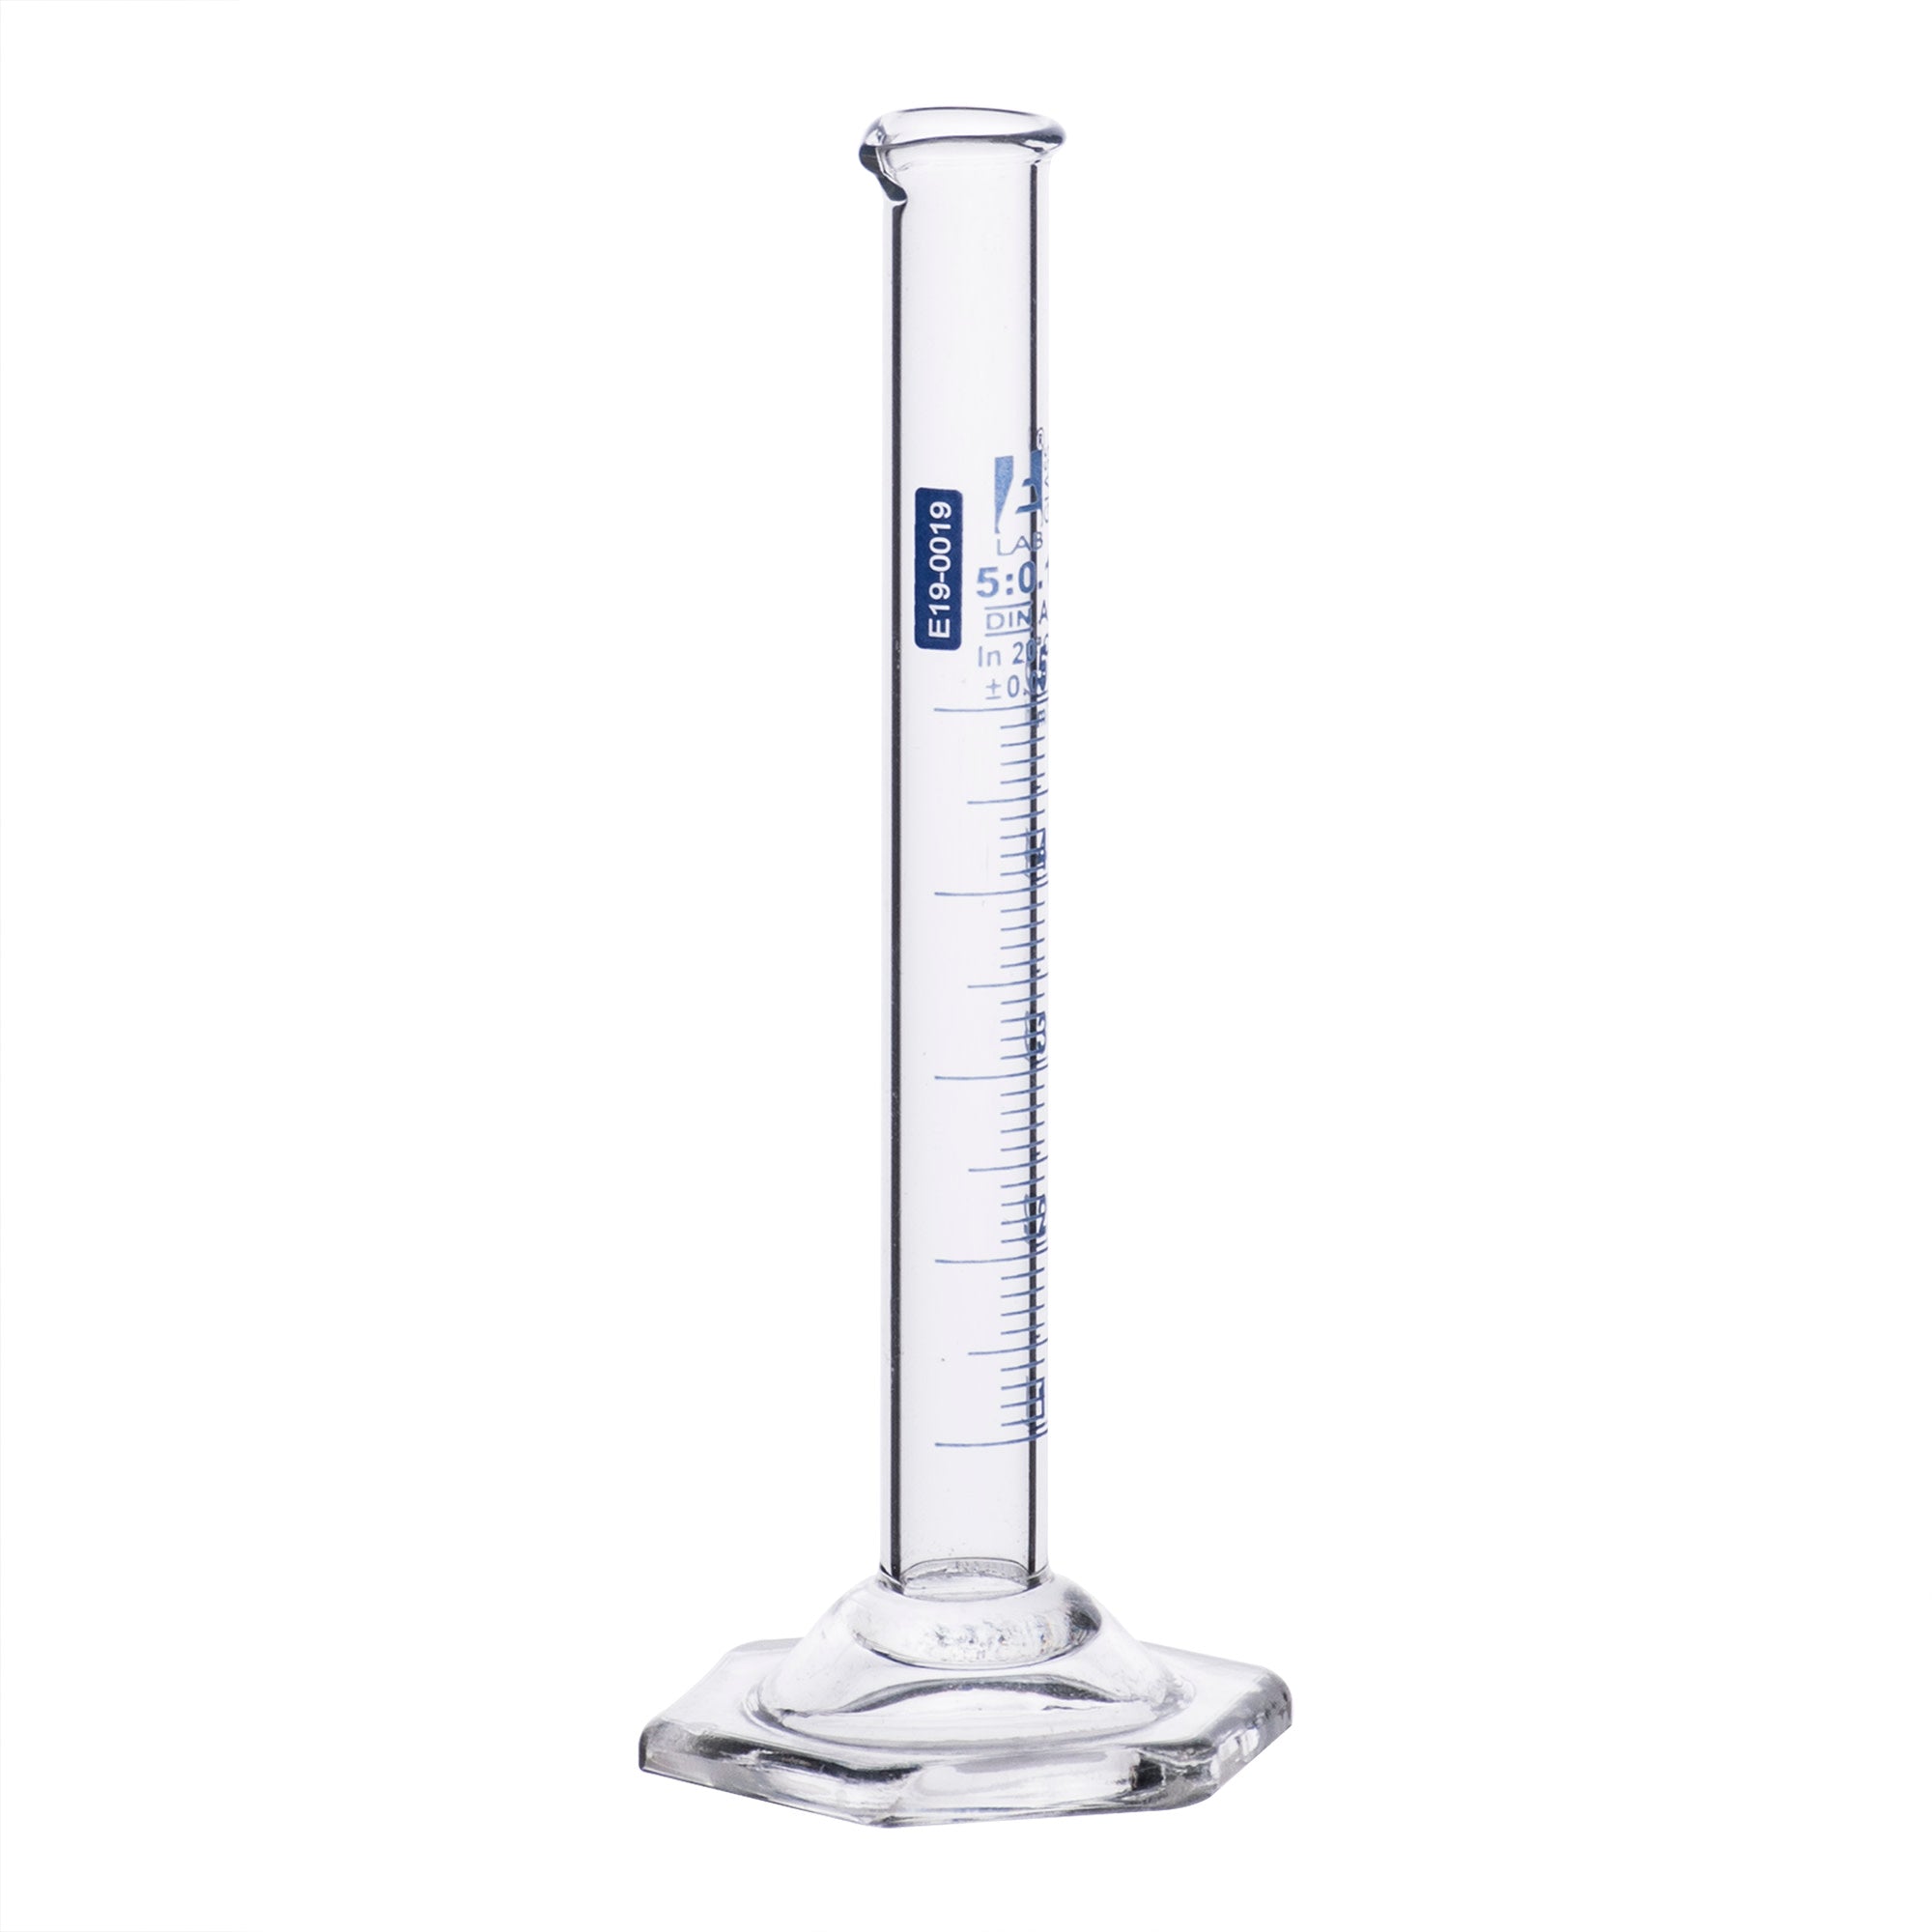 Borosilicate Glass Graduated Cylinder with Hexagonal Base, 5 ml, Class A with Individual Work Certificate